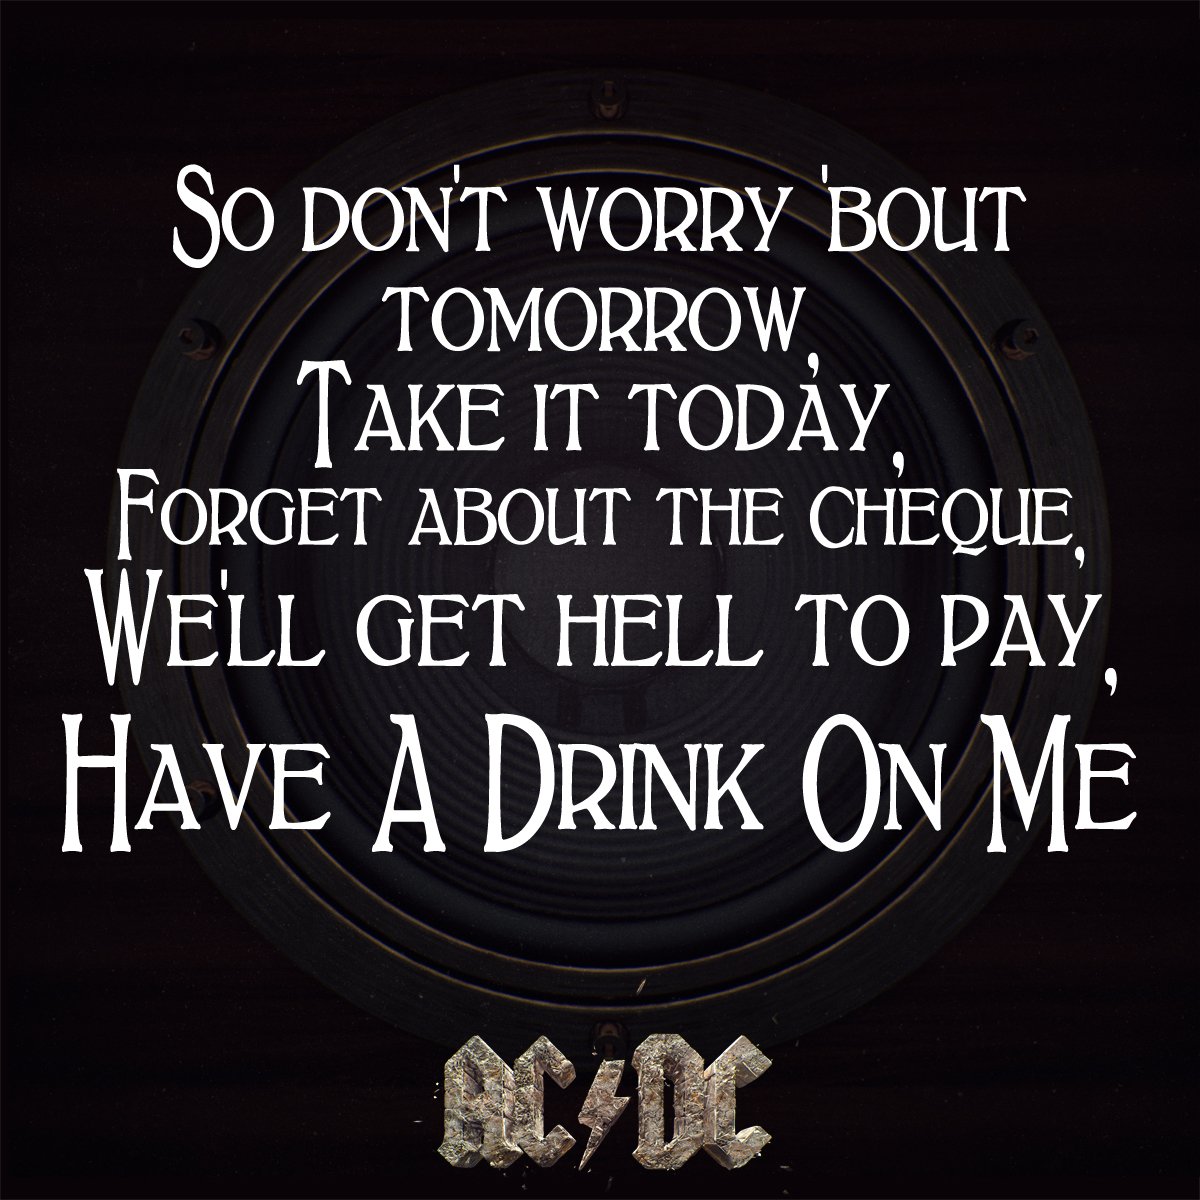 Botany Play sports industry AC/DC on Twitter: "Have A Drink On Me #ACDCAtlanta https://t.co/Z8DRzH8TnH"  / Twitter